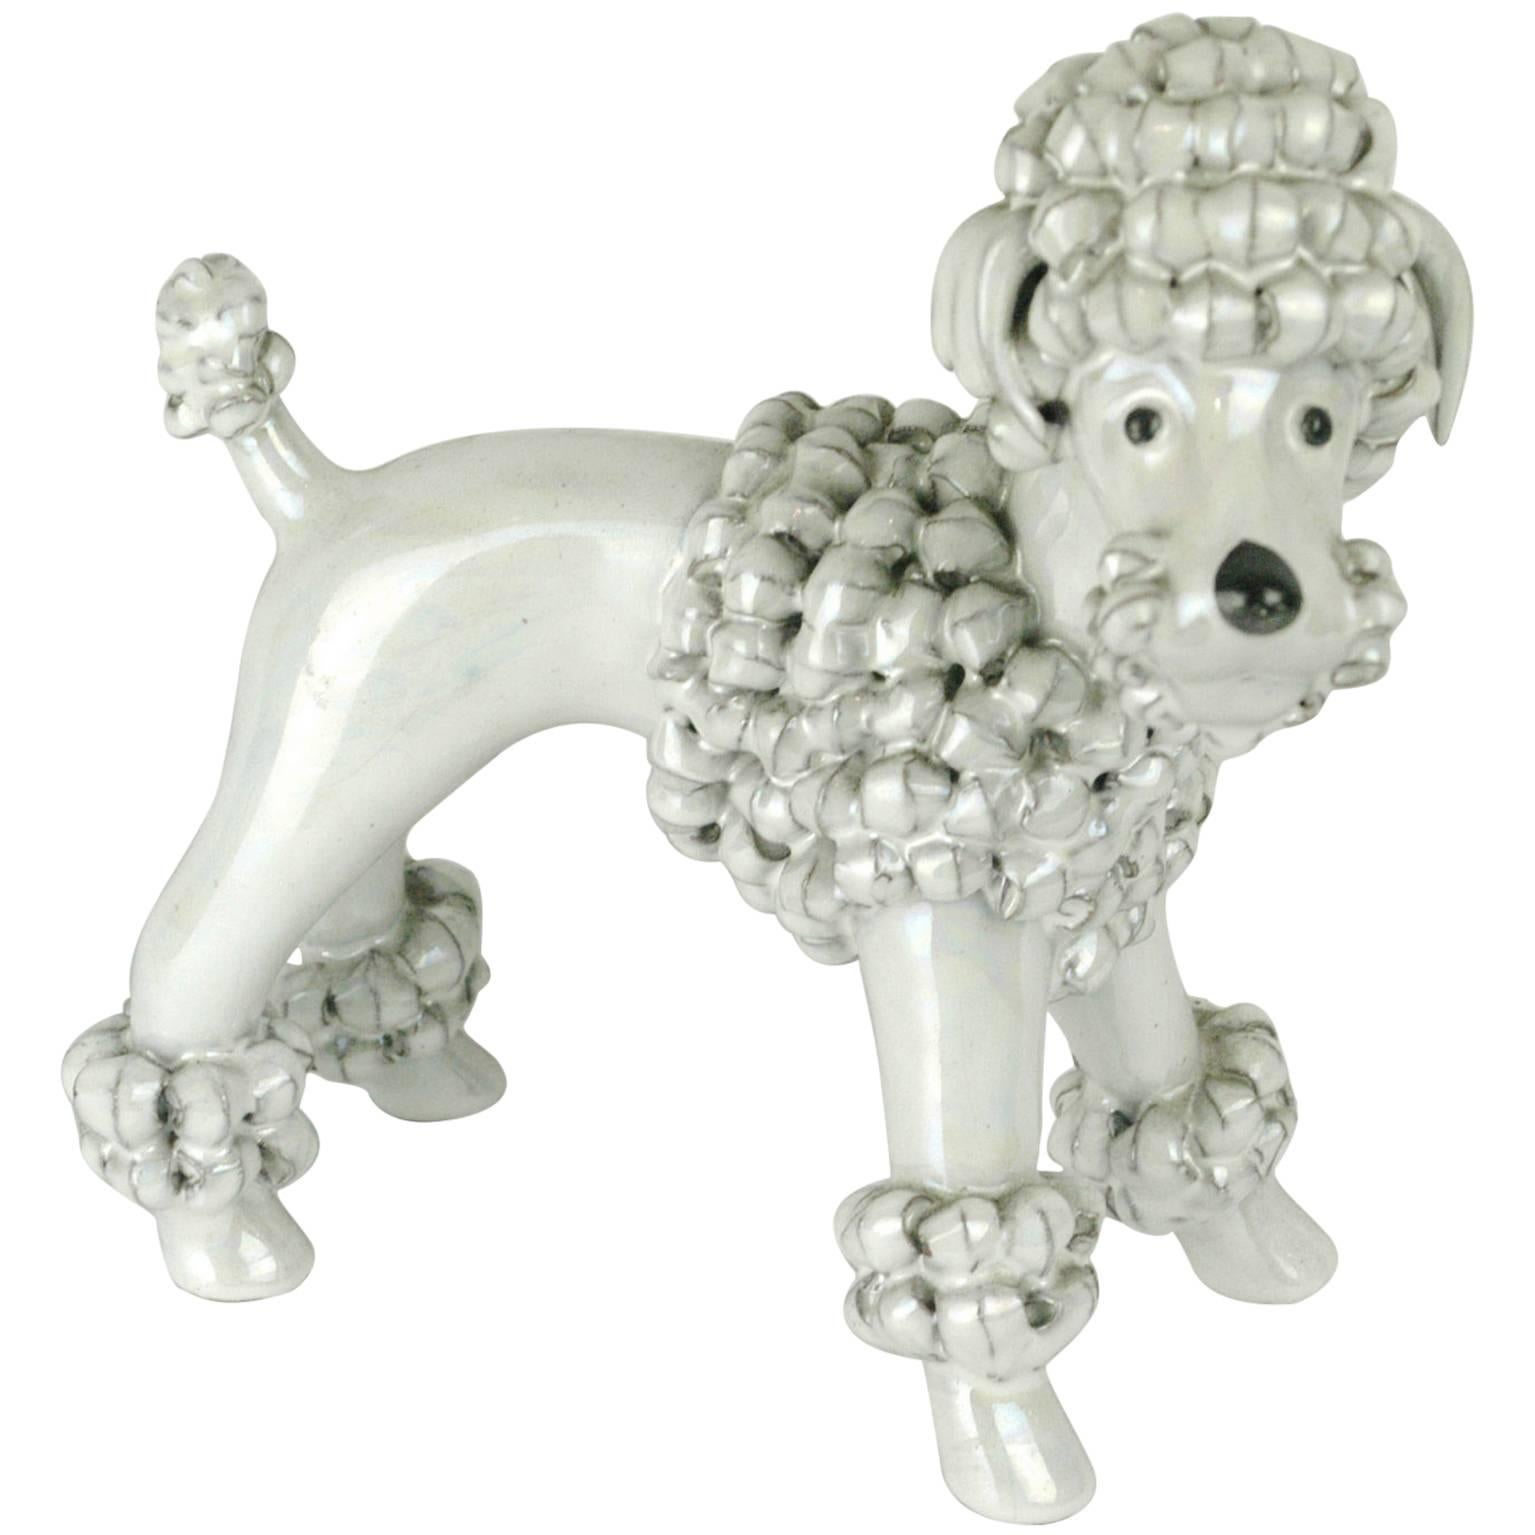 Austrian Midcentury Ceramic Dog  "Poodle" by Leopold Anzengruber